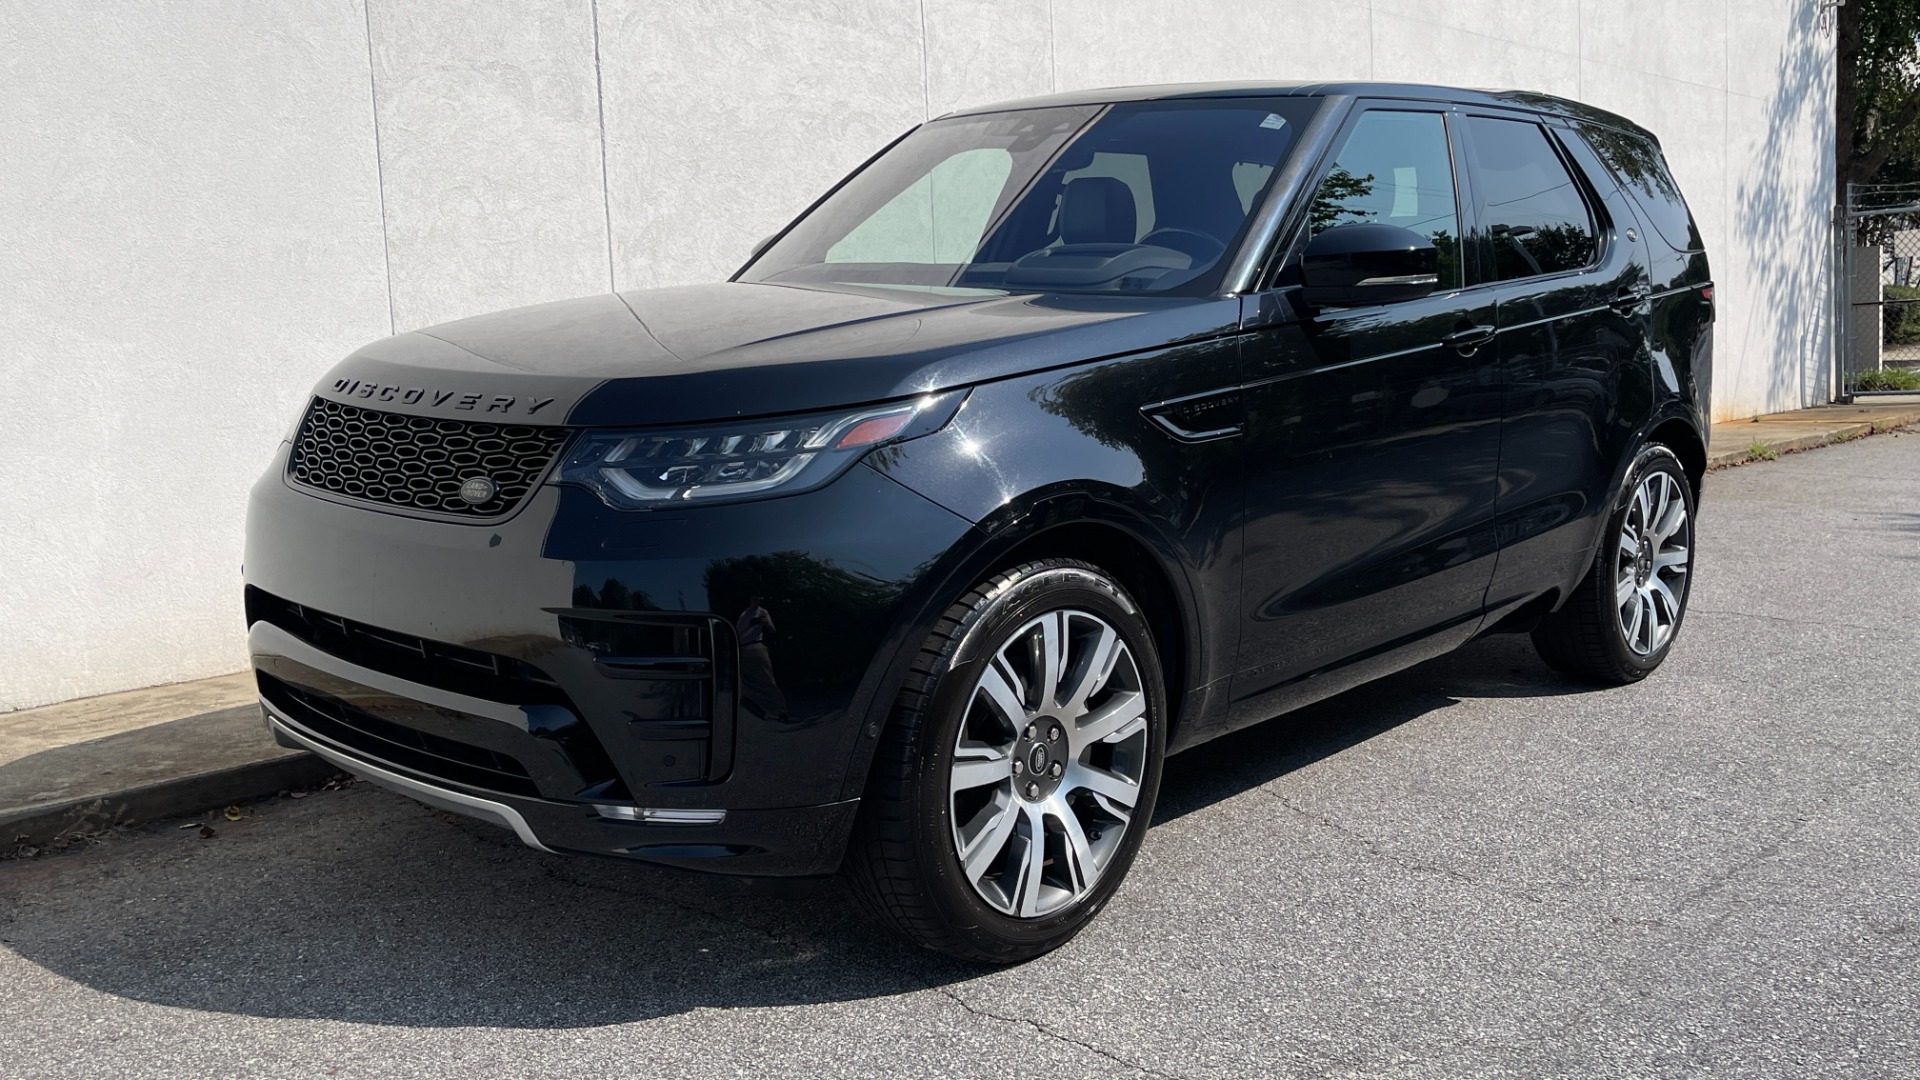 Used 2019 Land Rover Discovery HSE / SEVEN SEAT / DYNAMIC PACKAGE / 21IN WHEELS / REMOTE SEAT PACKAGE for sale $46,495 at Formula Imports in Charlotte NC 28227 3